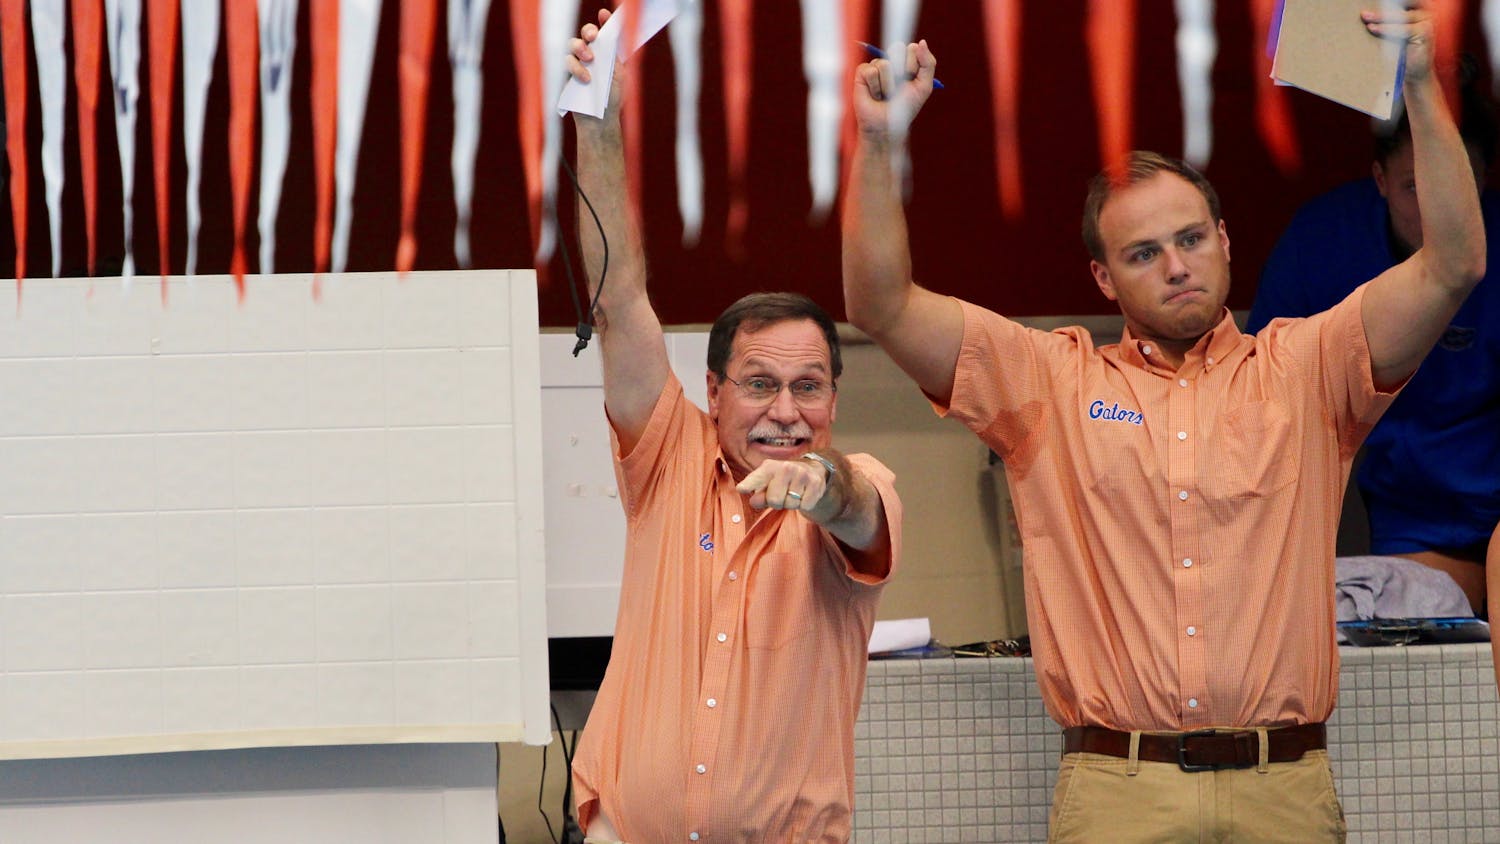 Florida swimming and diving head coach Gregg Troy (left) was pleased with his team's showings at the Auburn Invitational this past weekend.